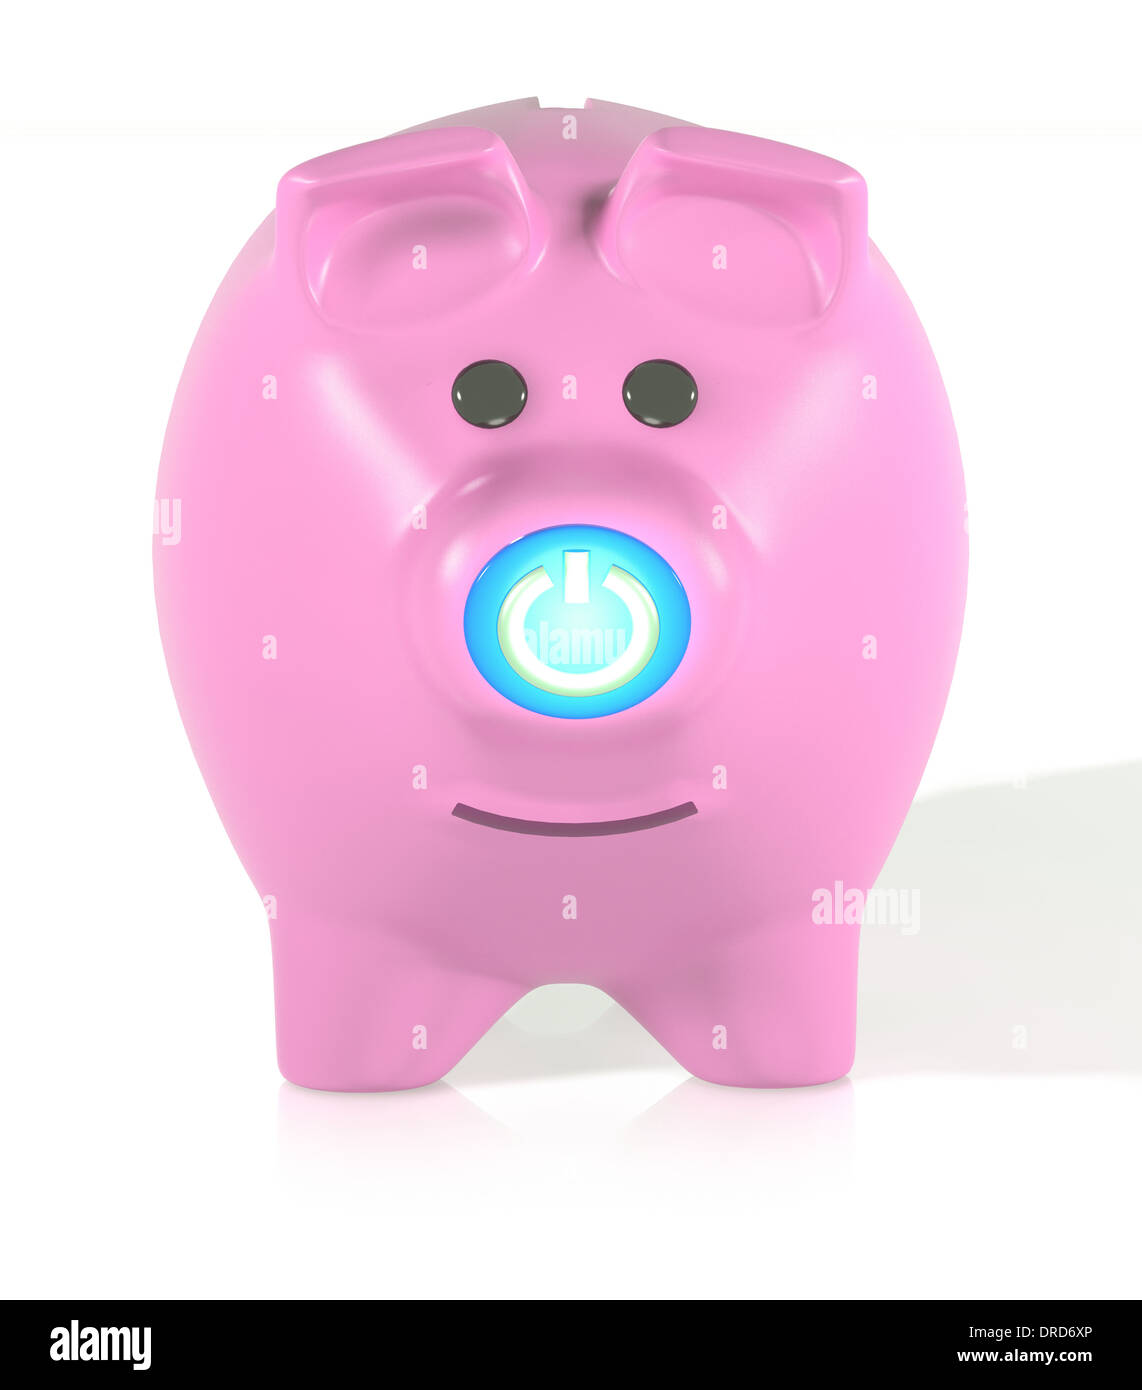 Concept for turn on your savings Stock Photo